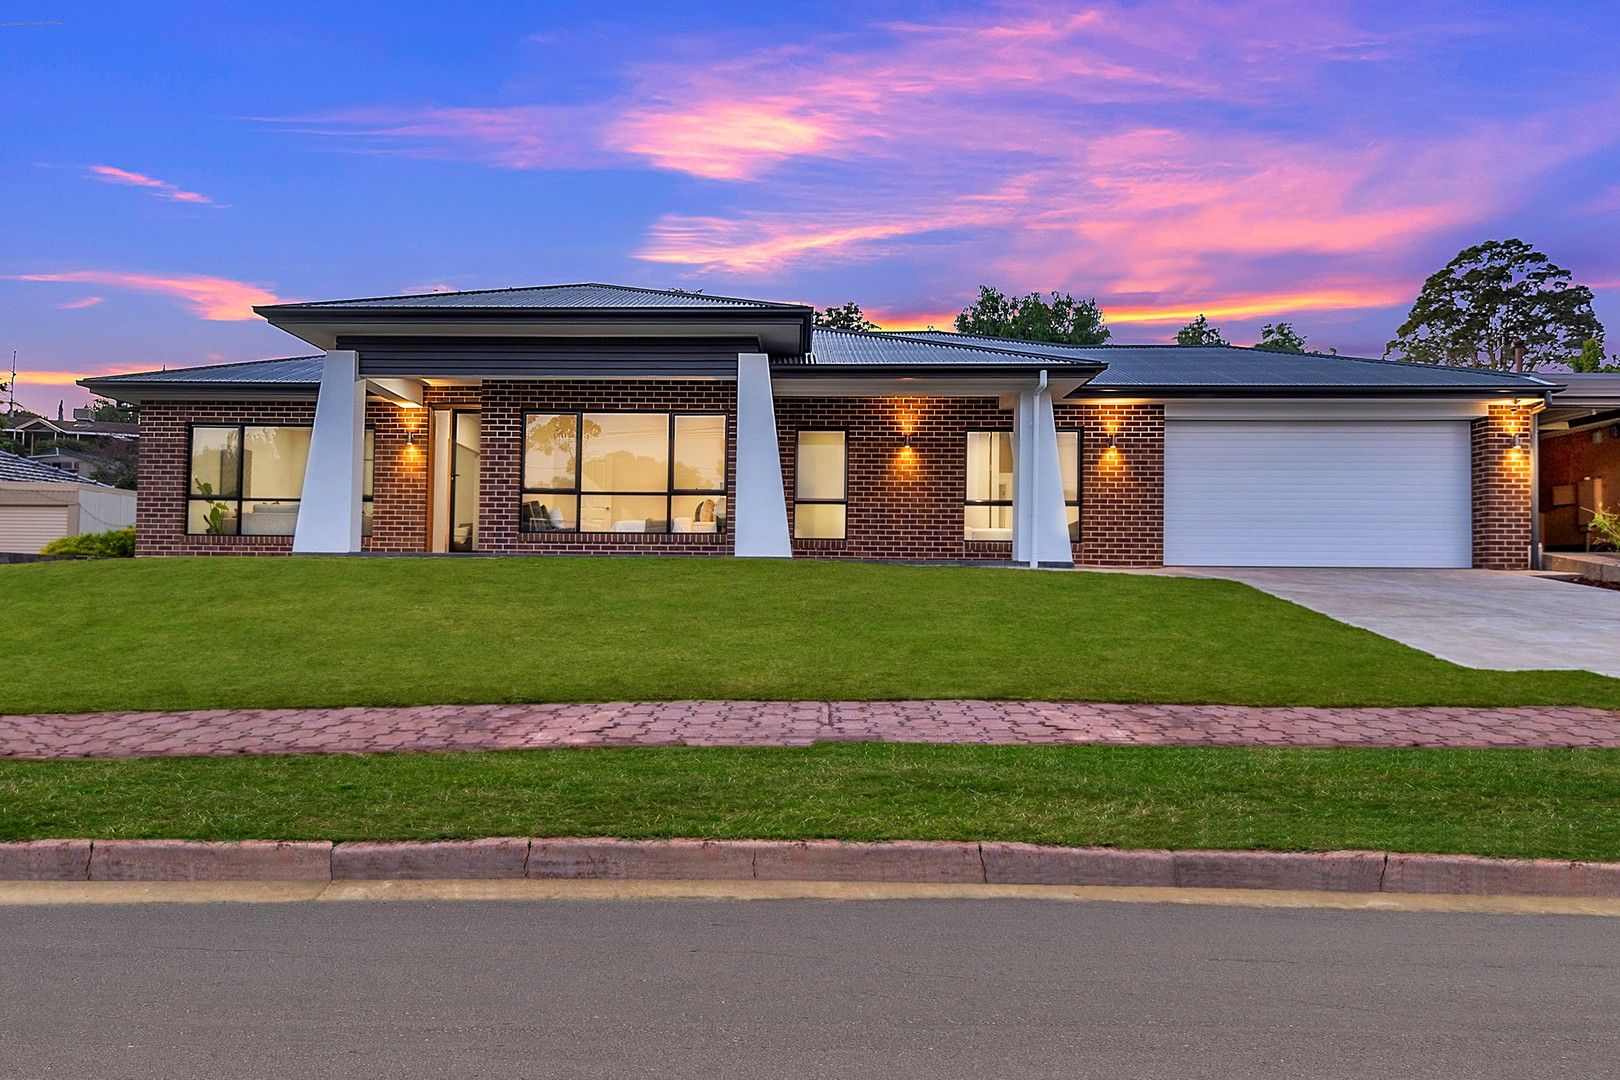 4 bedrooms House in 14 Derwent Terrace VALLEY VIEW SA, 5093